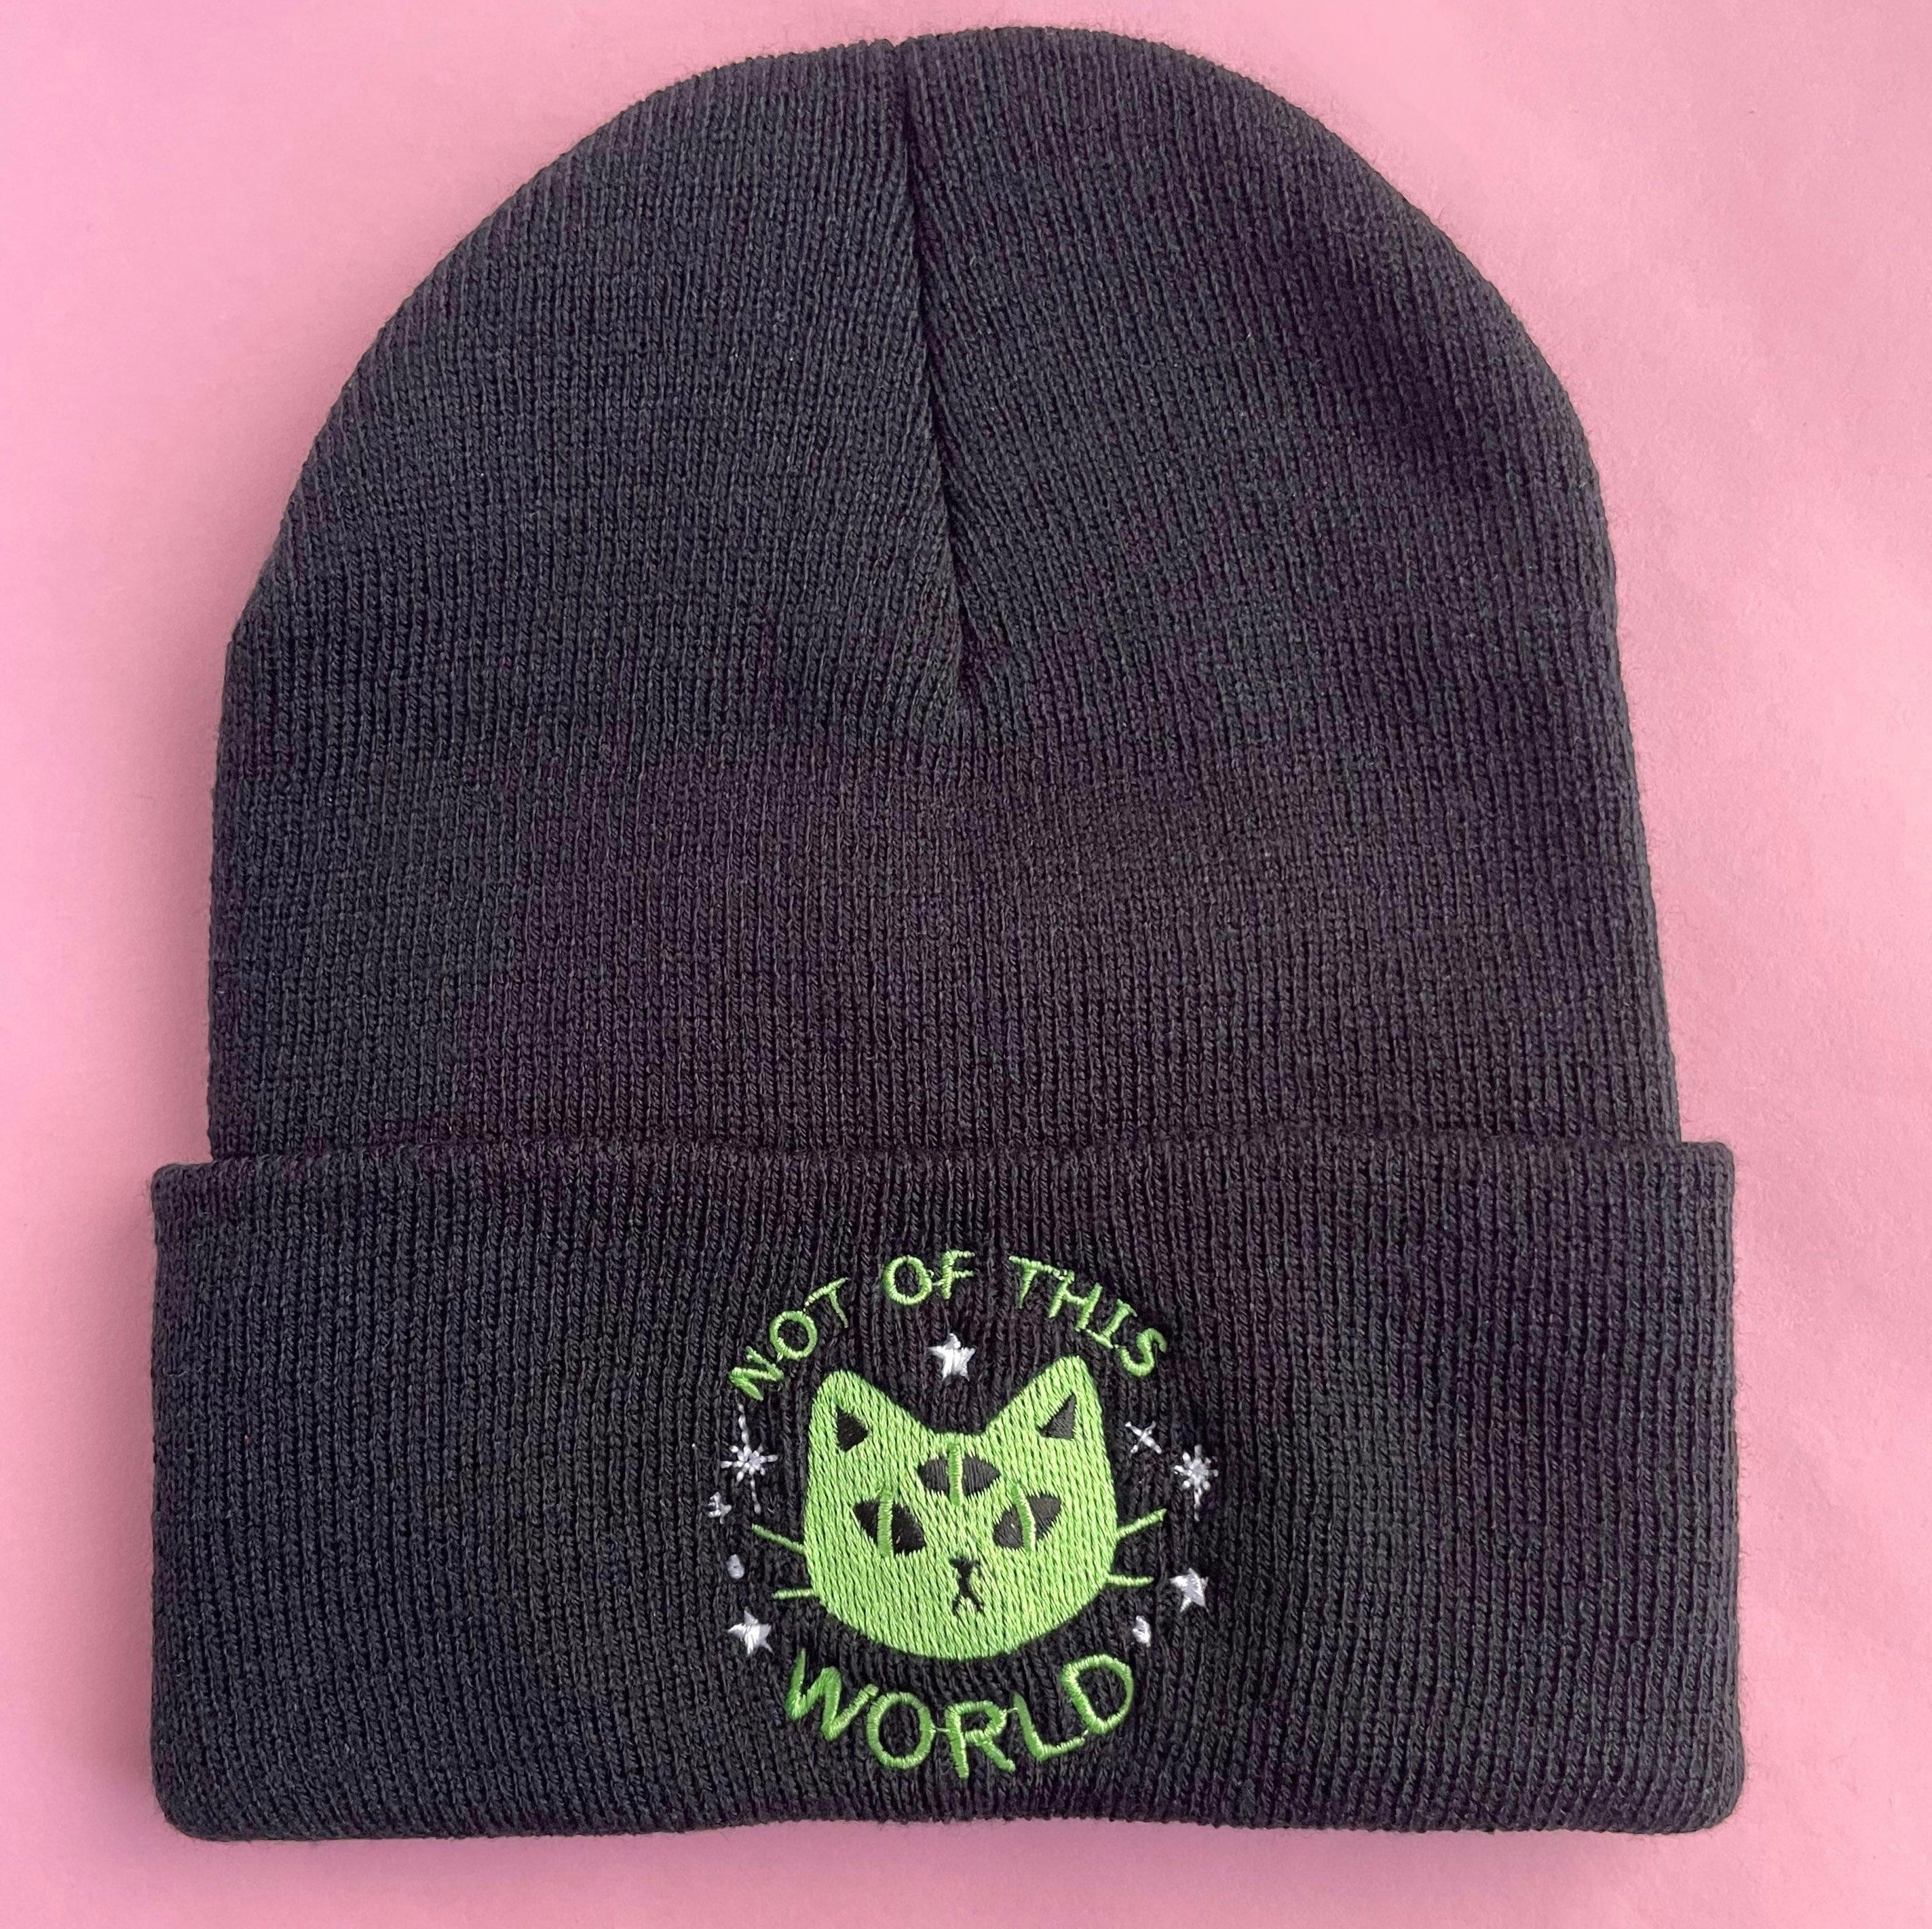 NOT OF THIS WORLD - ALIEN CAT EMBROIDERED BEANIE